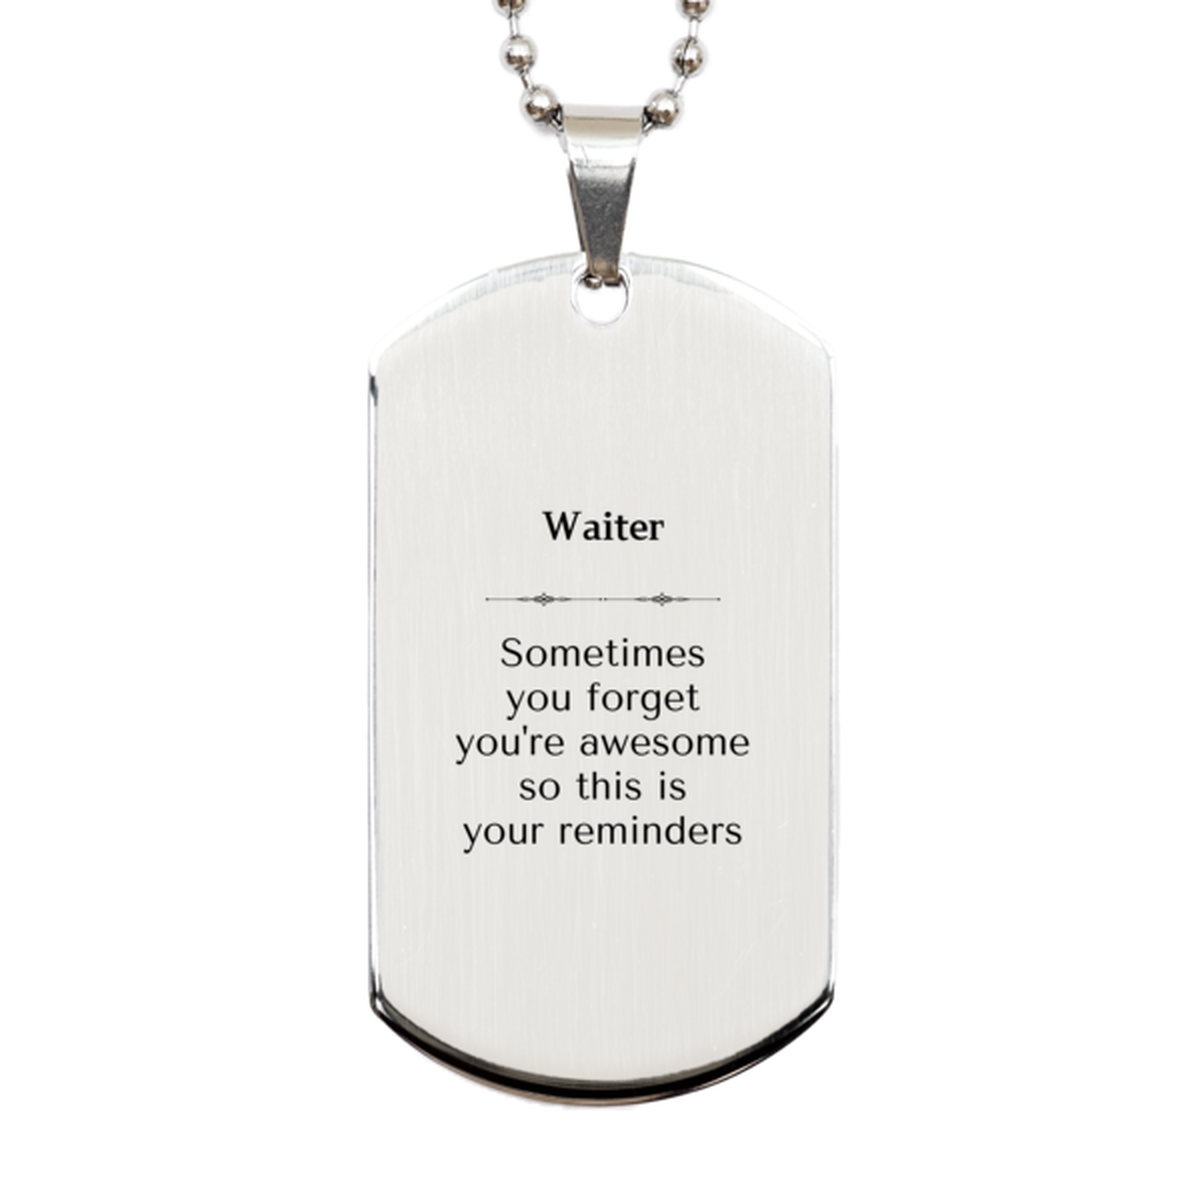 Sentimental Waiter Silver Dog Tag, Waiter Sometimes you forget you're awesome so this is your reminders, Graduation Christmas Birthday Gifts for Waiter, Men, Women, Coworkers